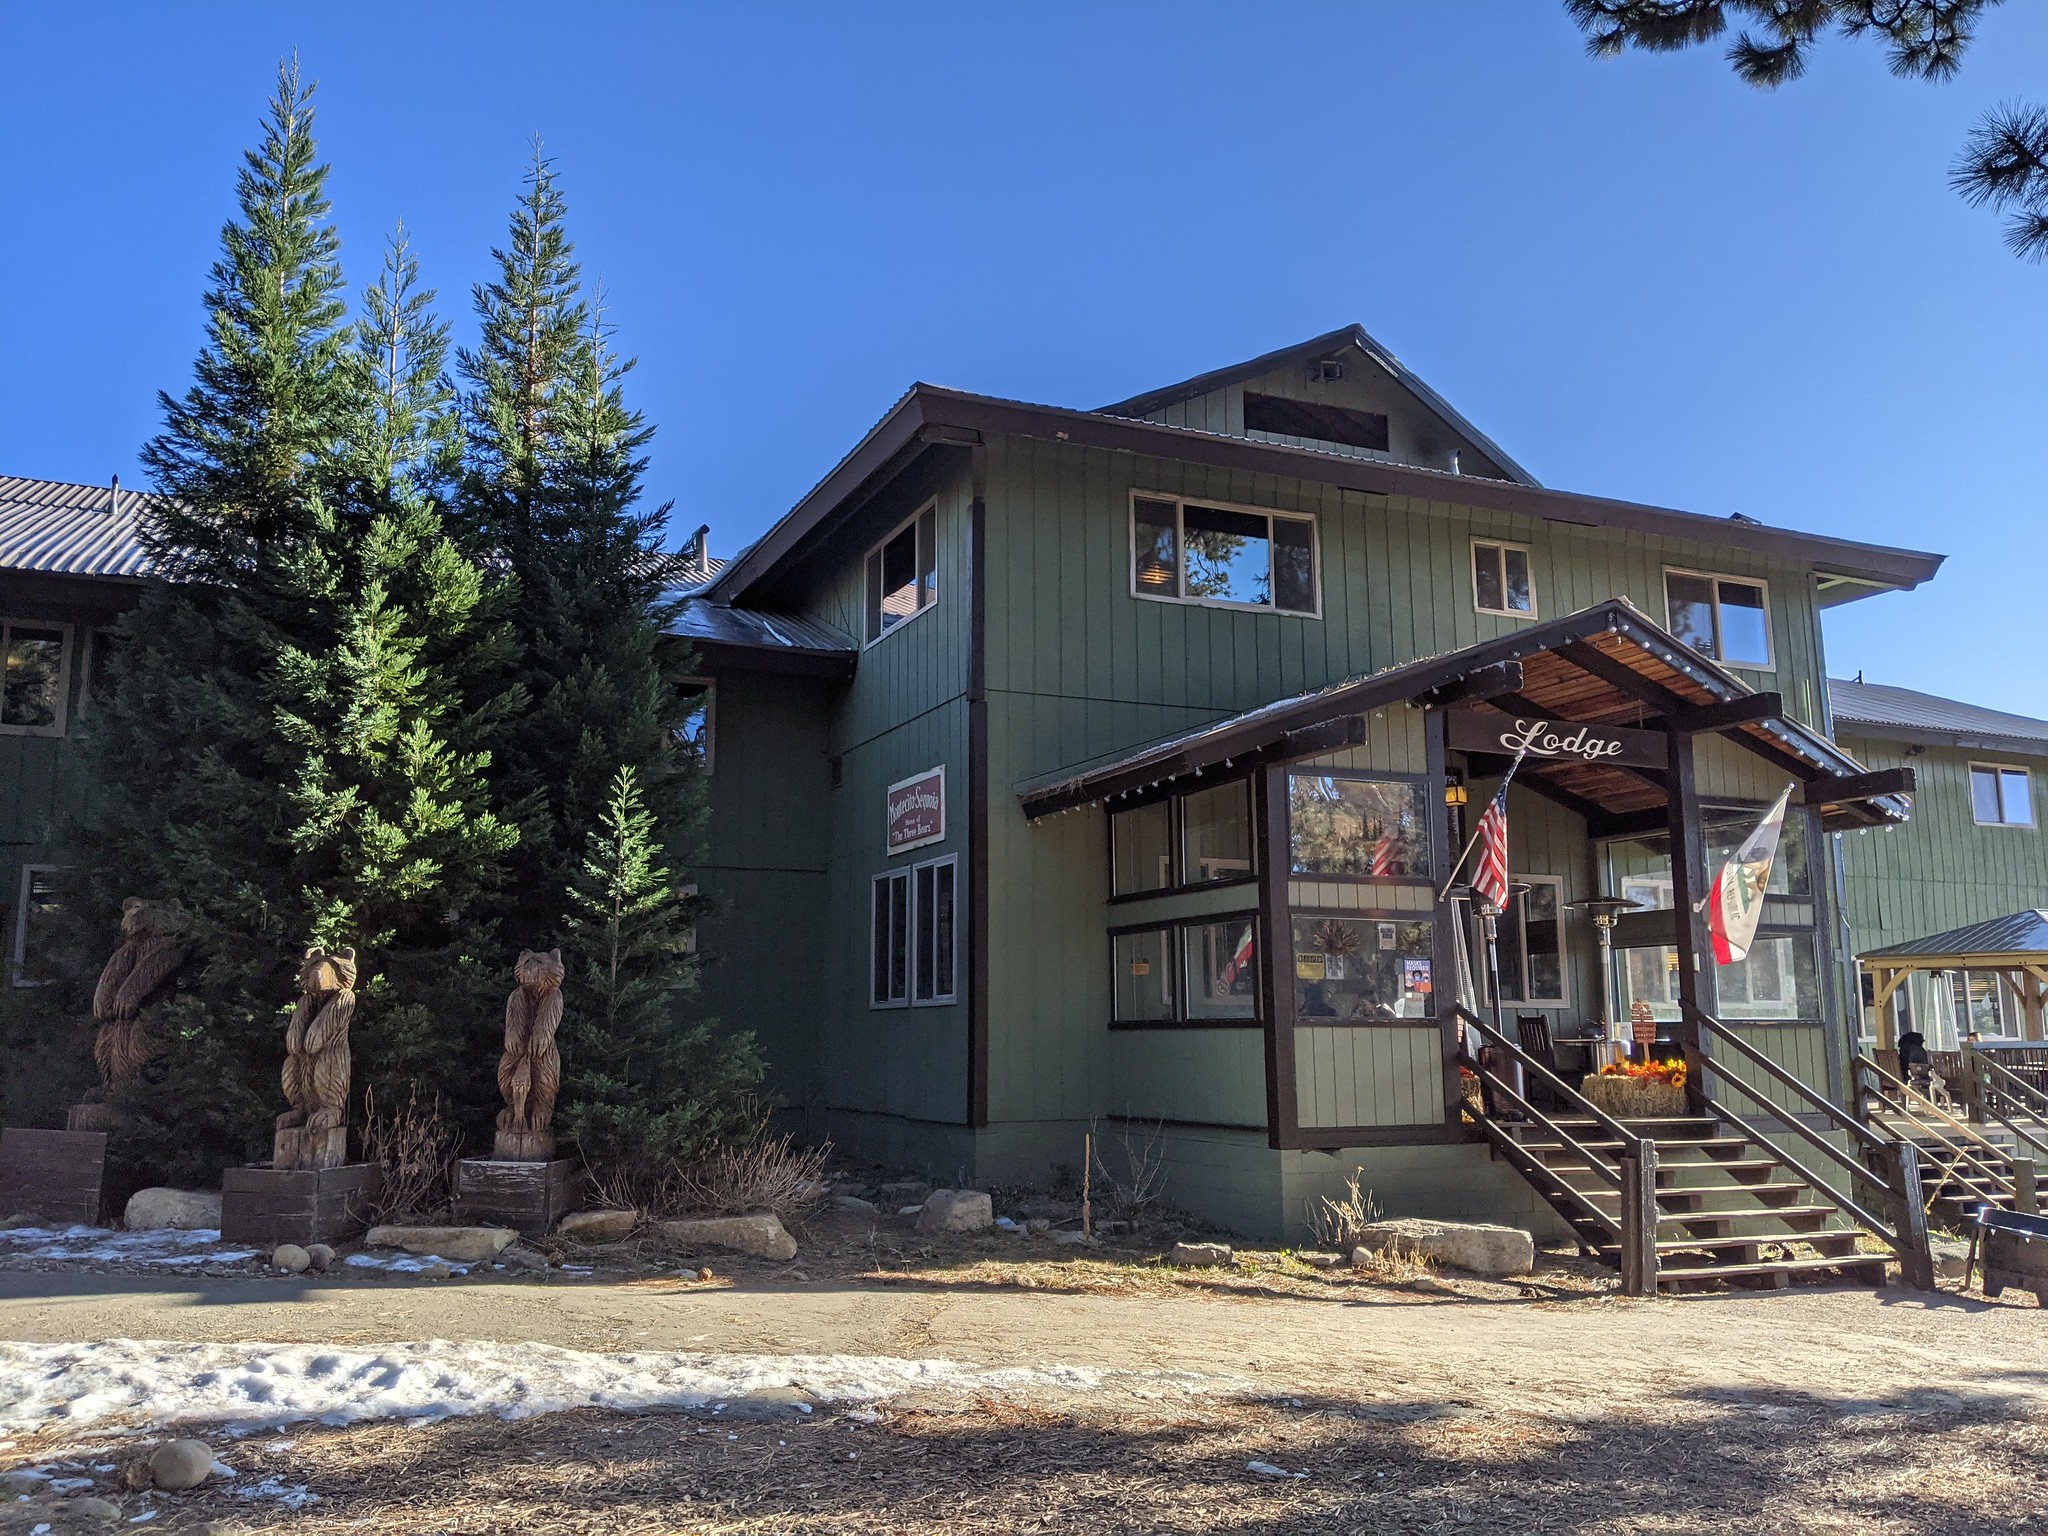 The simple wooden structure of Montecito Sequoia Lodge in Sequoia National Park, named as one of the best all-inclusive resorts in the U.S., with two flags by the entrance